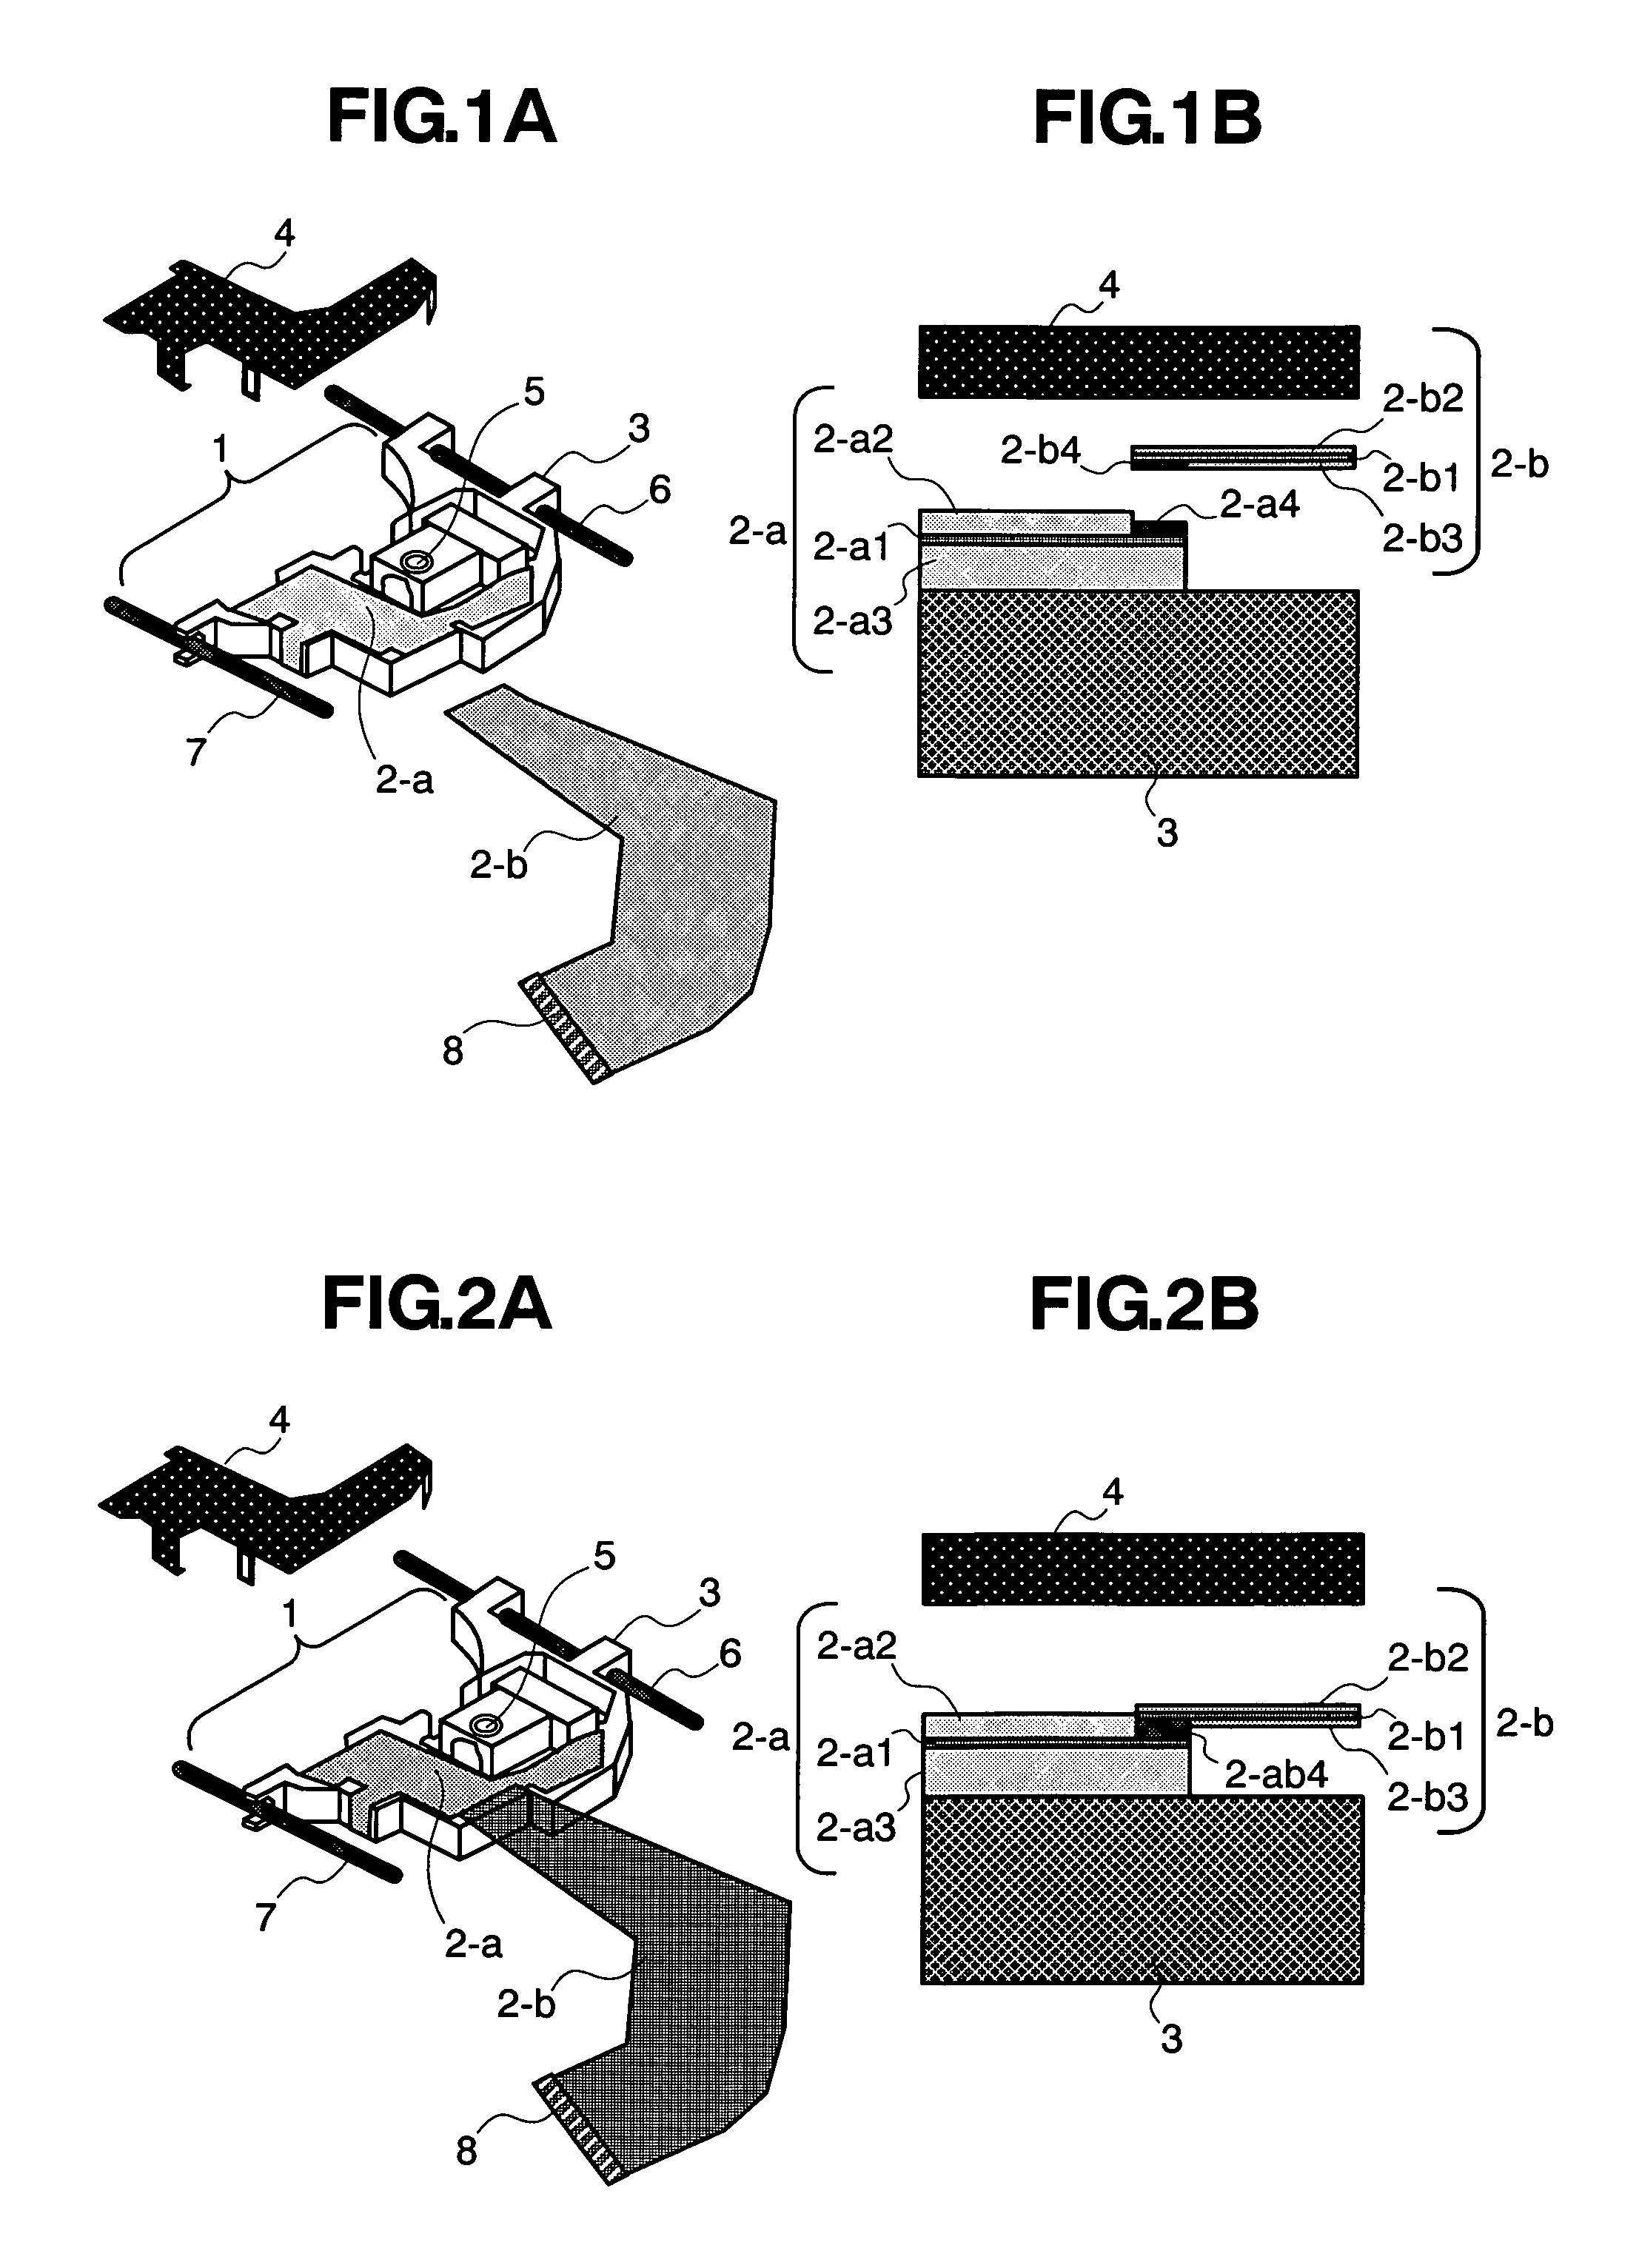 Optical disk drive apparatus having a flexible substrate and wiring conductors